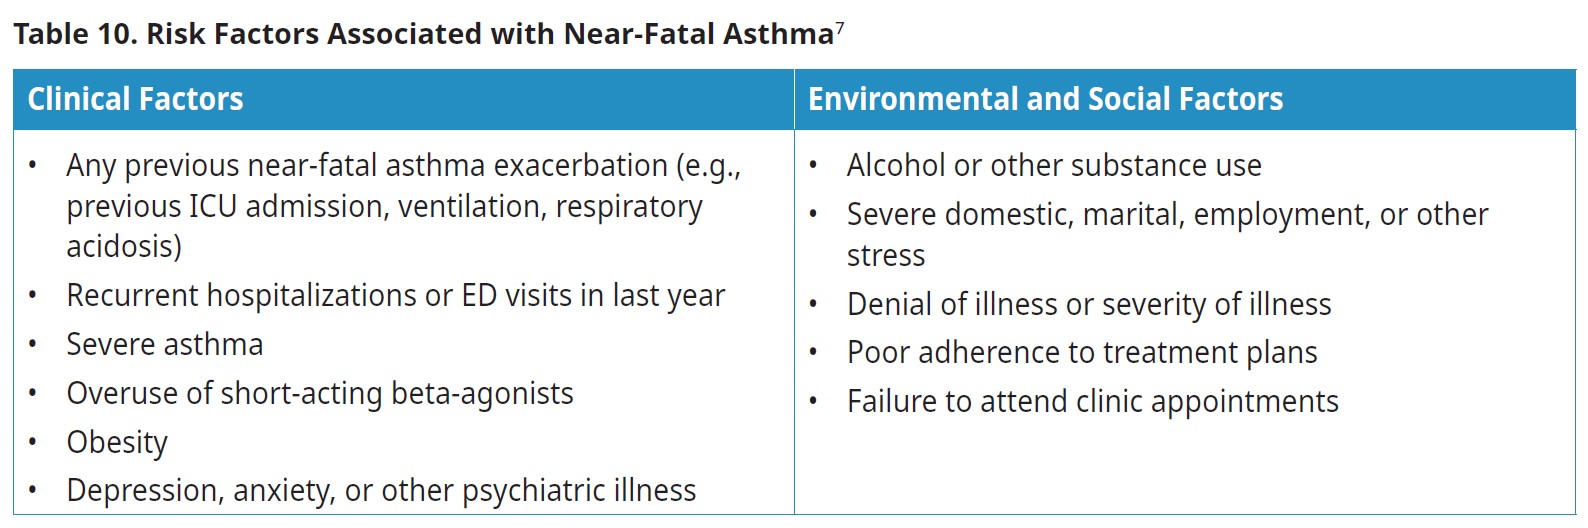 Risk factors associated with near-fatal asthma